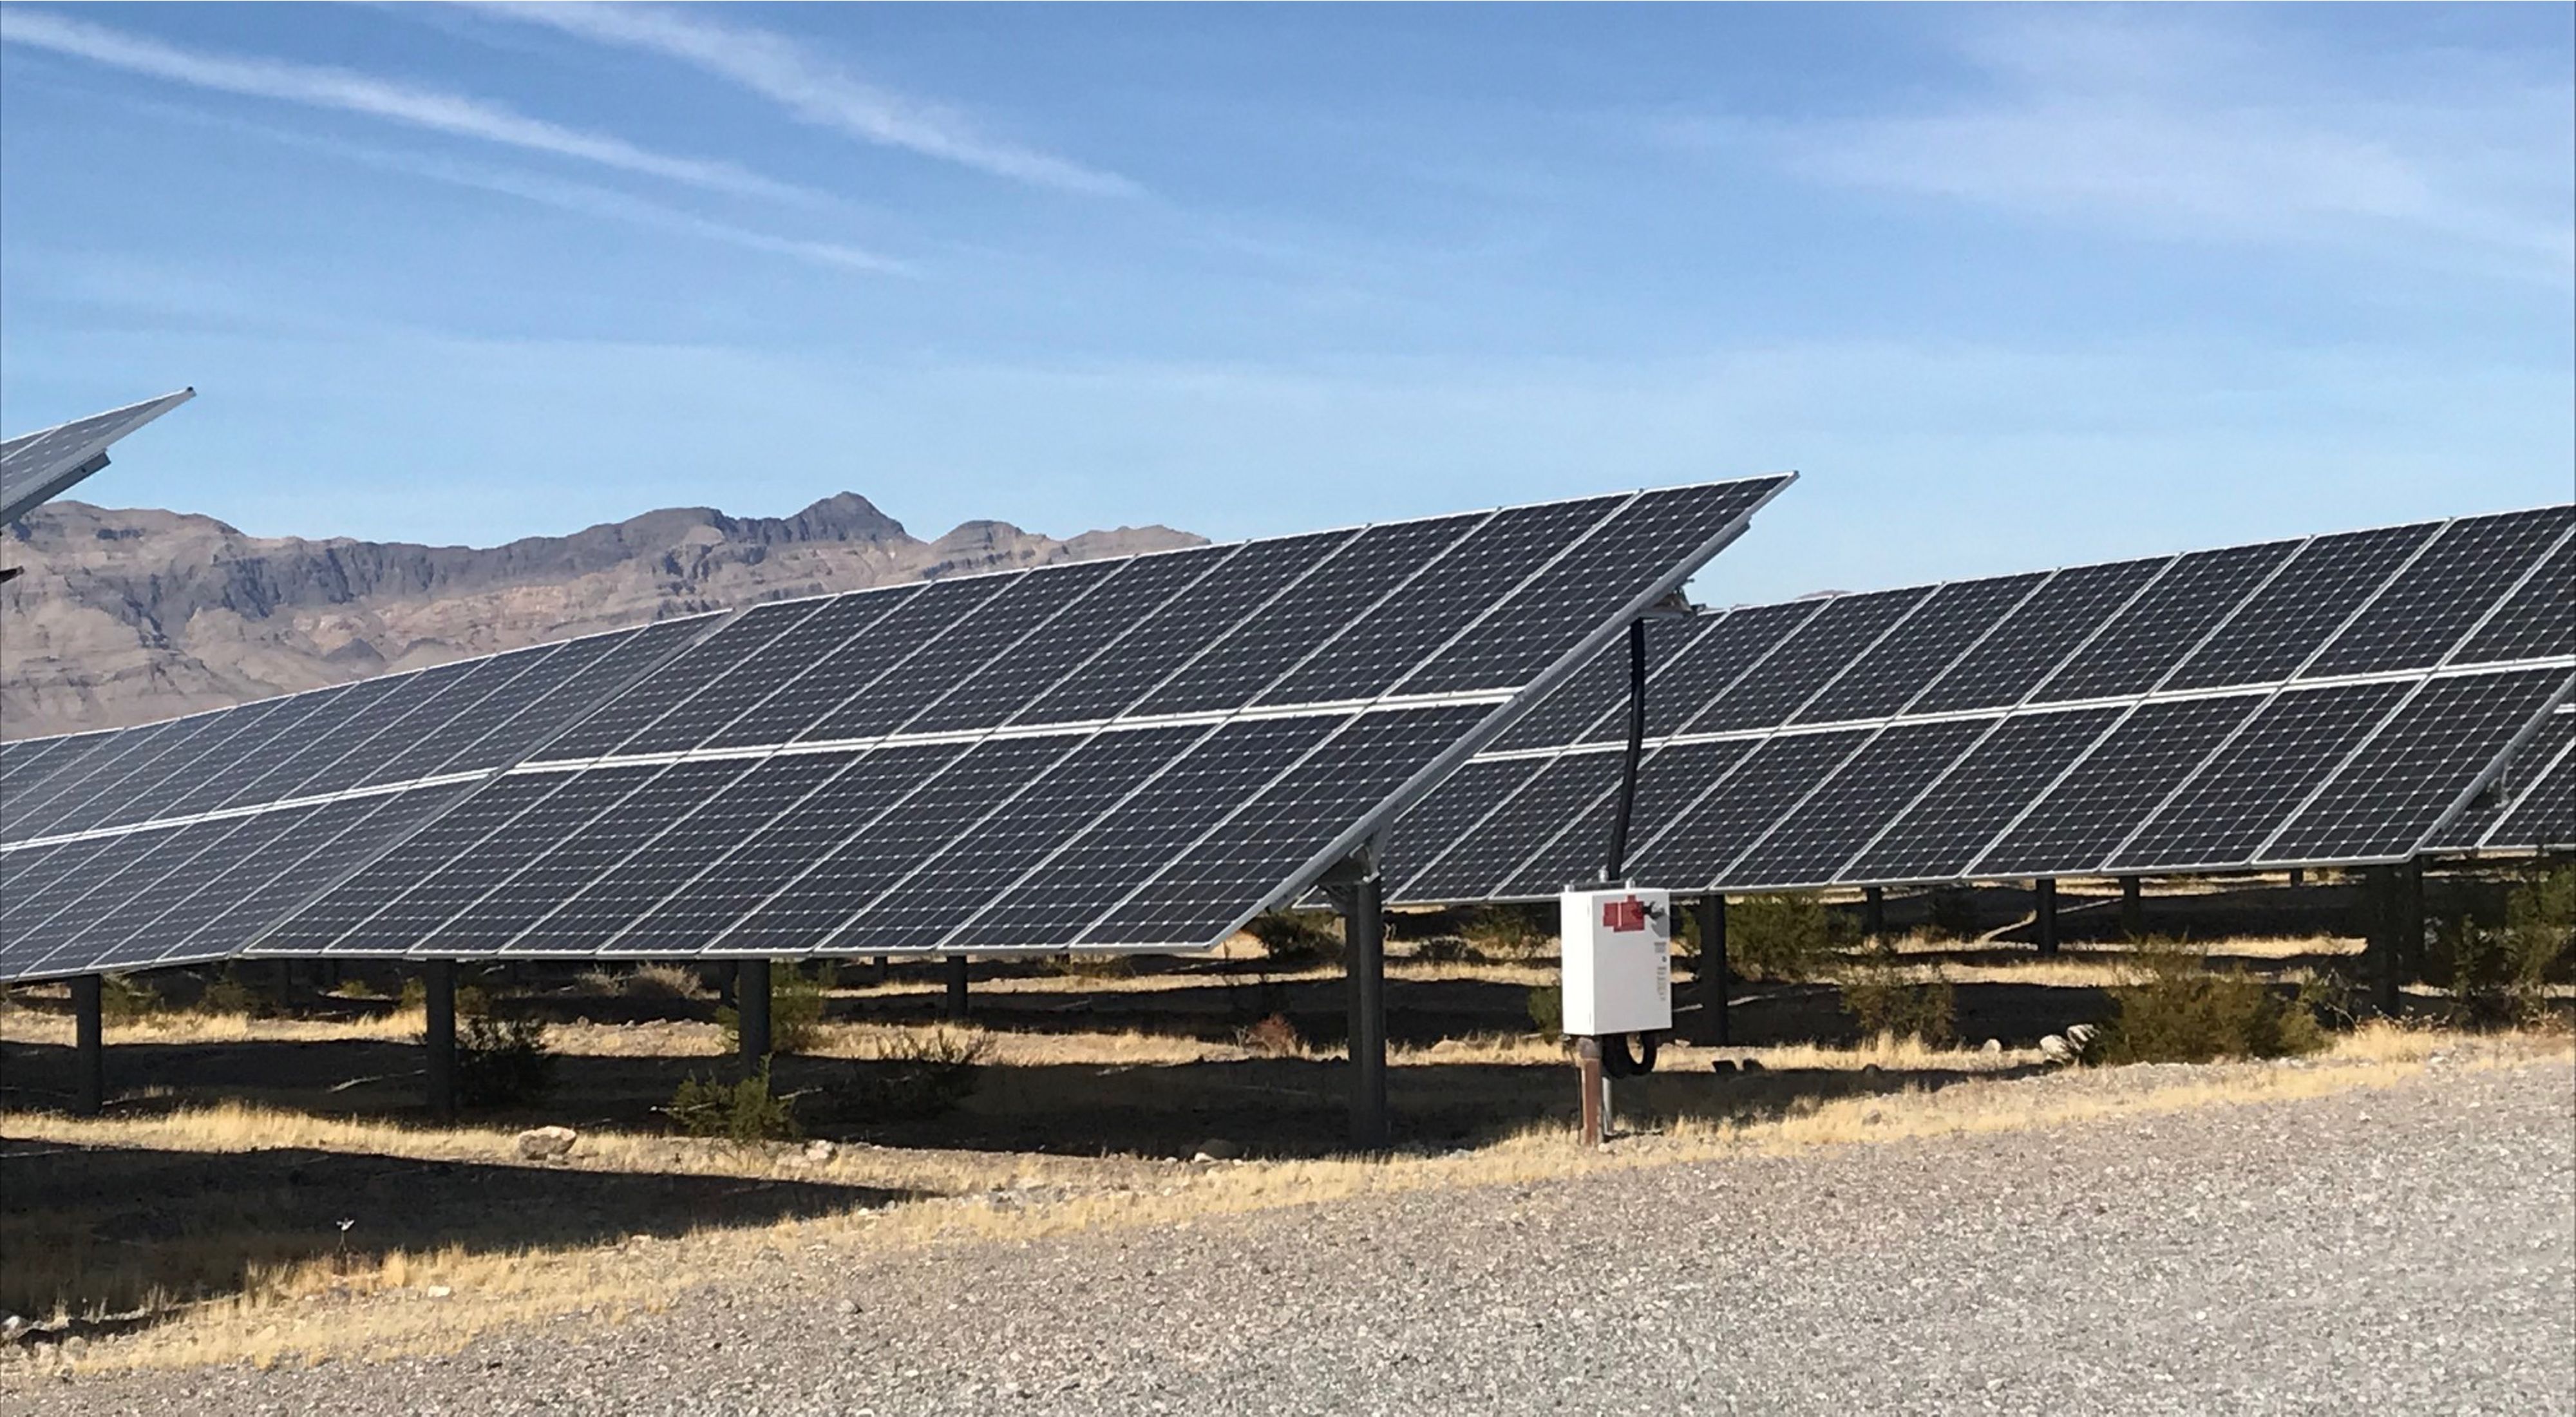 Photo of solar panels in the Nevada desert, mountains in distance.